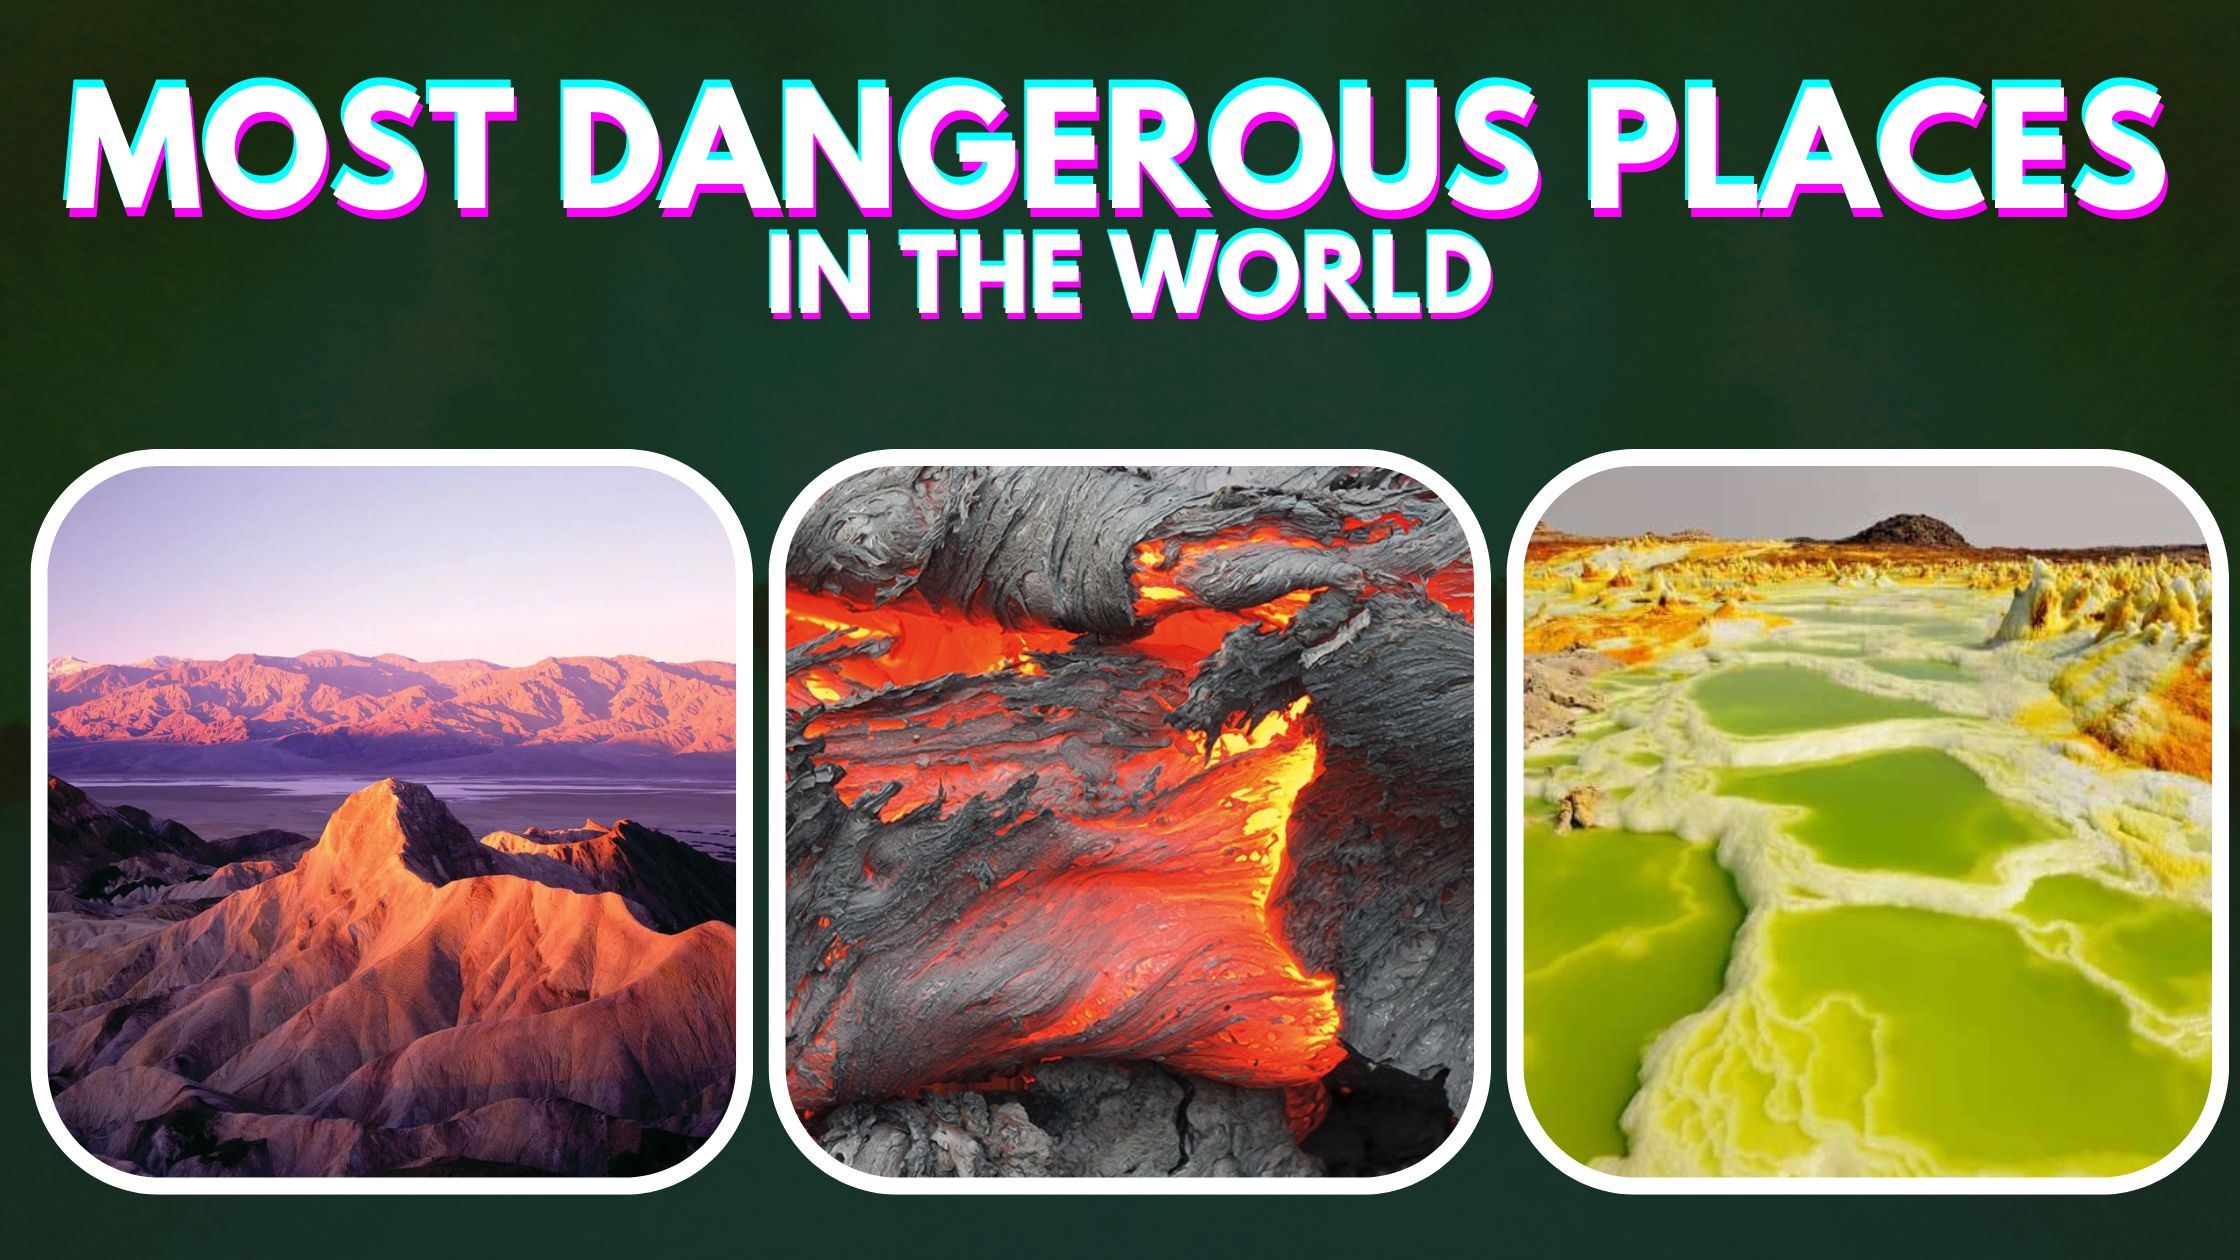 Top 10 Most Dangerous Places in the World